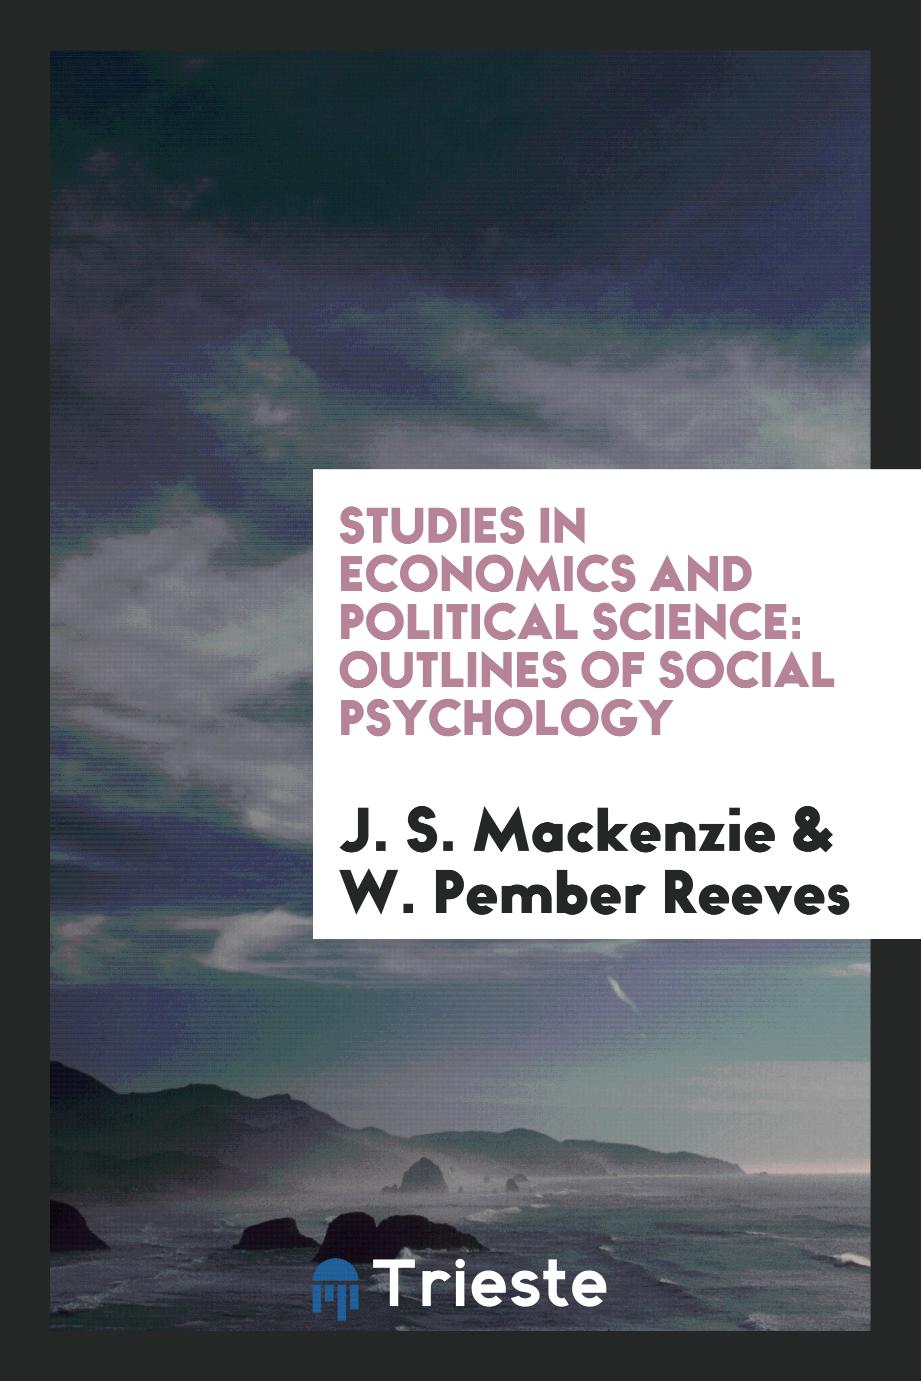 Studies in Economics and Political Science: Outlines of Social Psychology